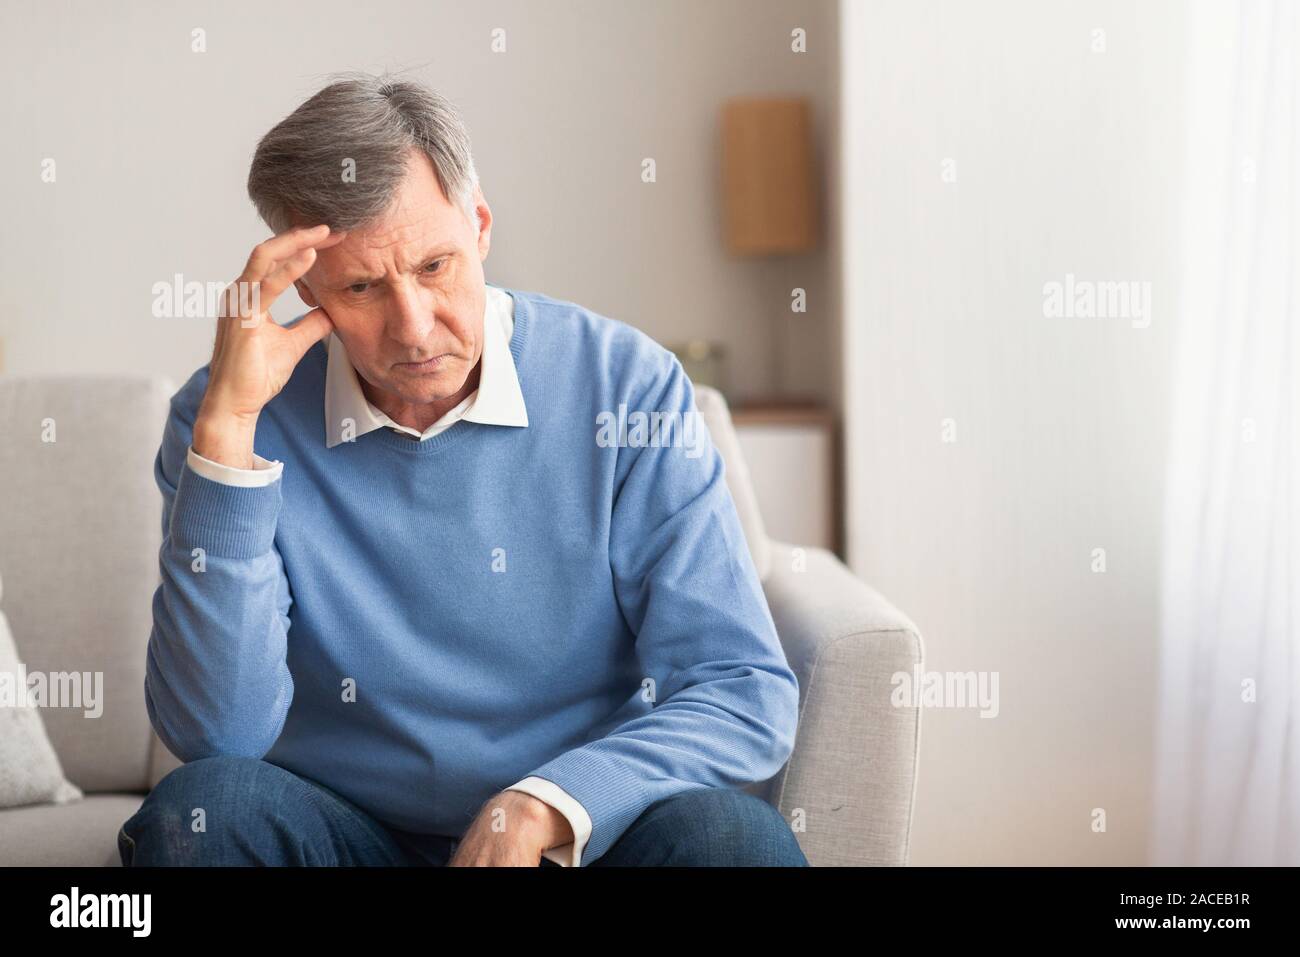 Elderly Man Thinking About Loneliness Sitting On Couch At Home Stock Photo